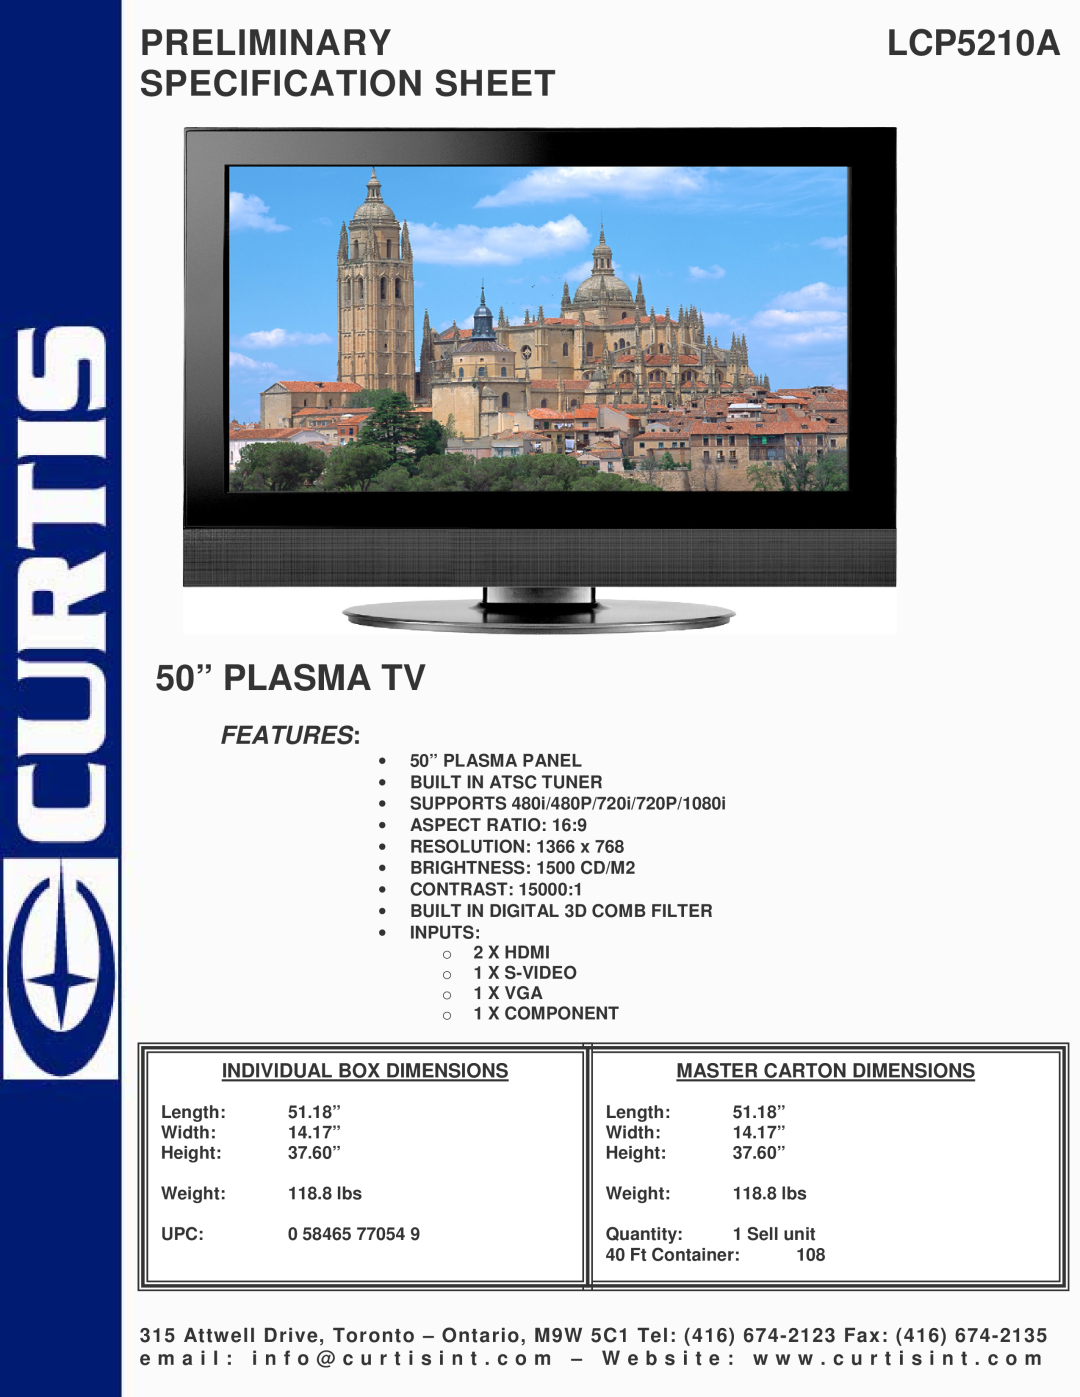 Curtis dimensions PRELIMINARYLCP5210A SPECIFICATION SHEET 50” PLASMA TV, Features 